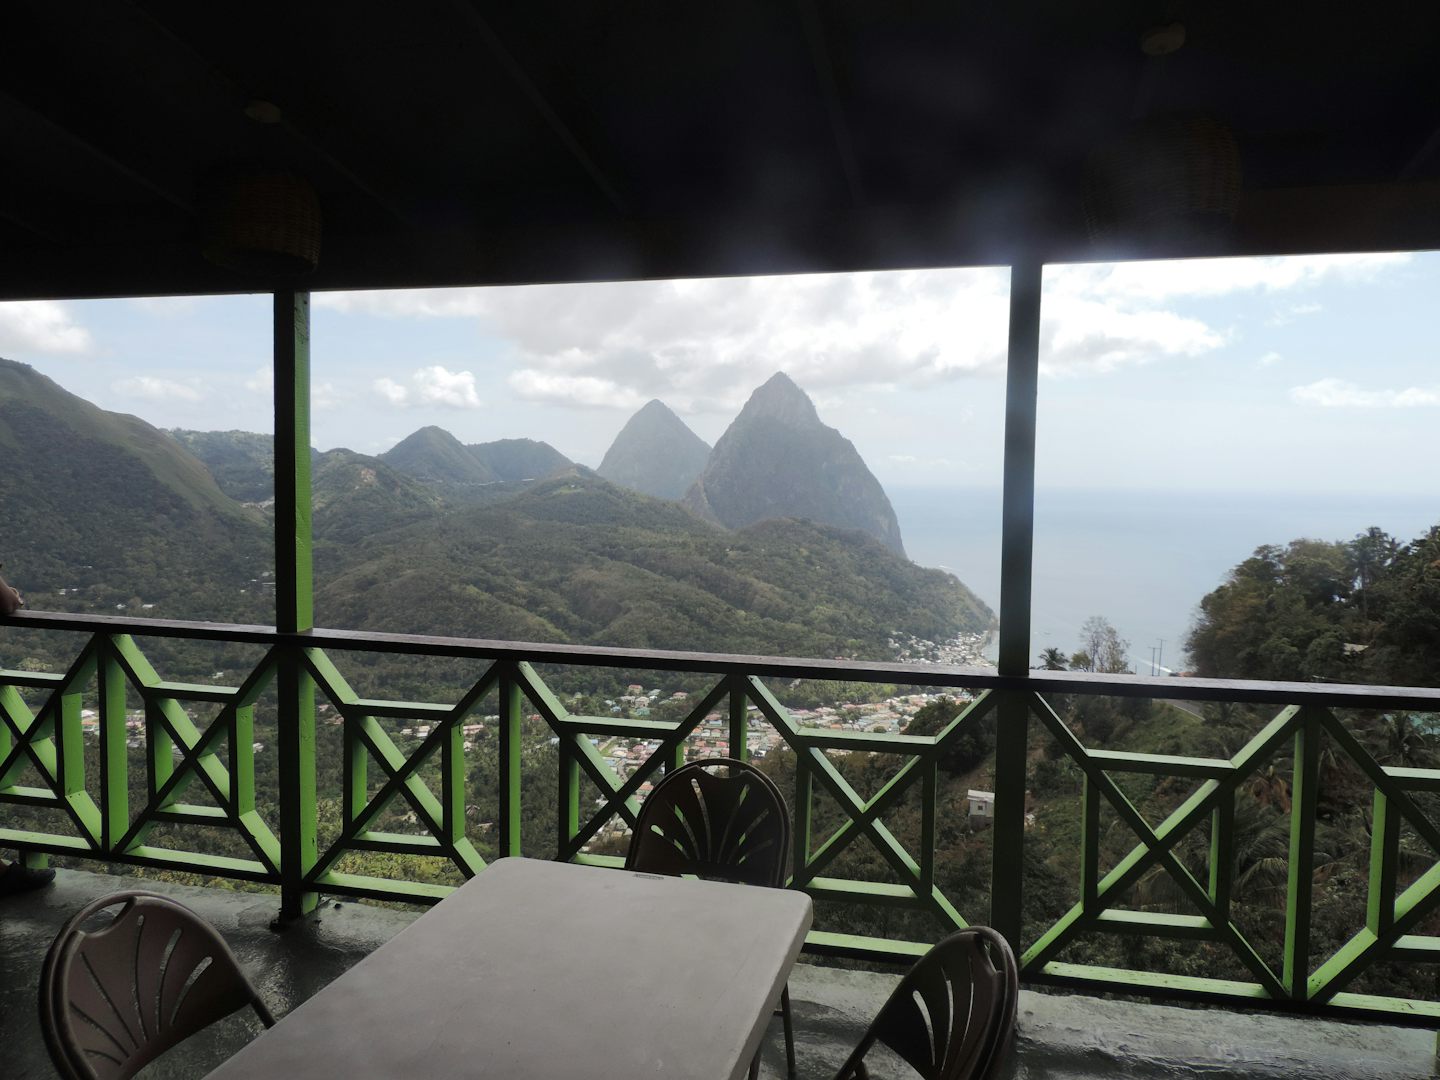 View of the Pitons from the lunch restaurant.